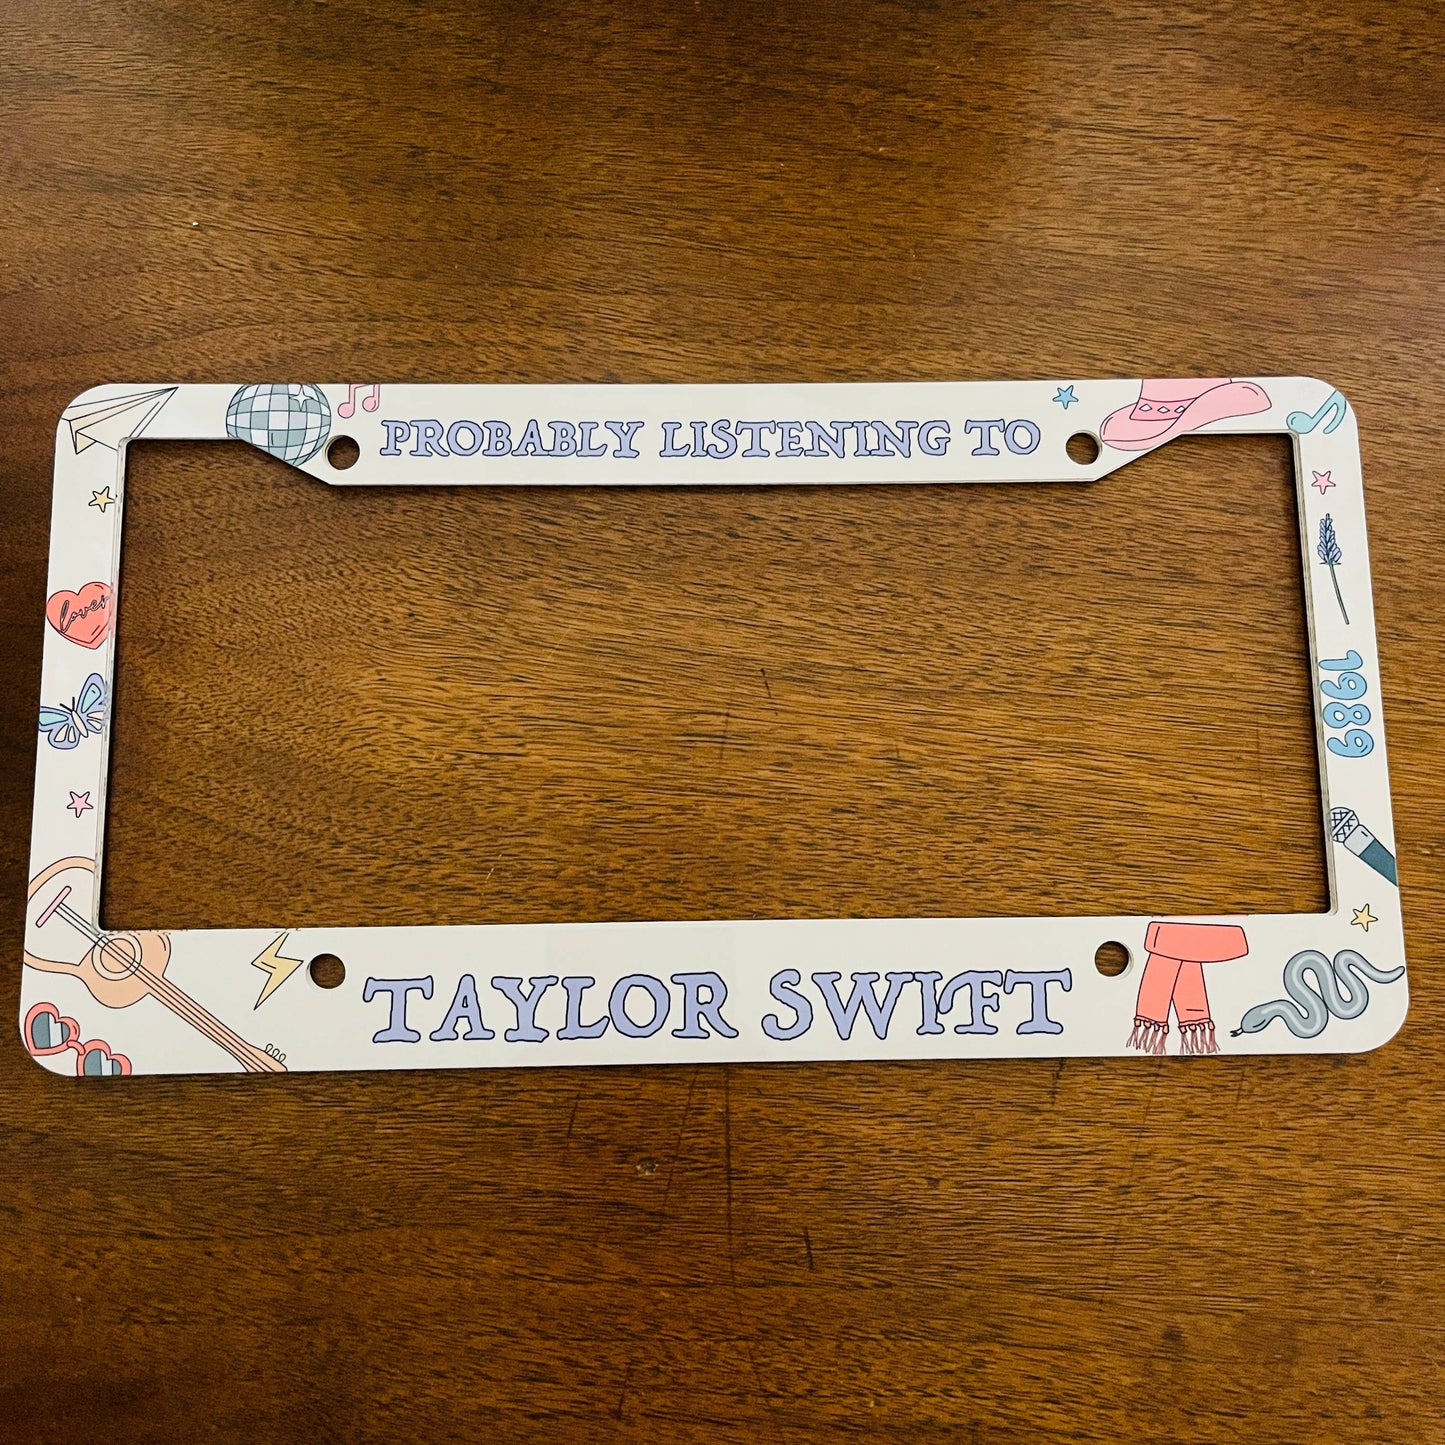 Probably Listening To Taylor Swift | License Plate Frame